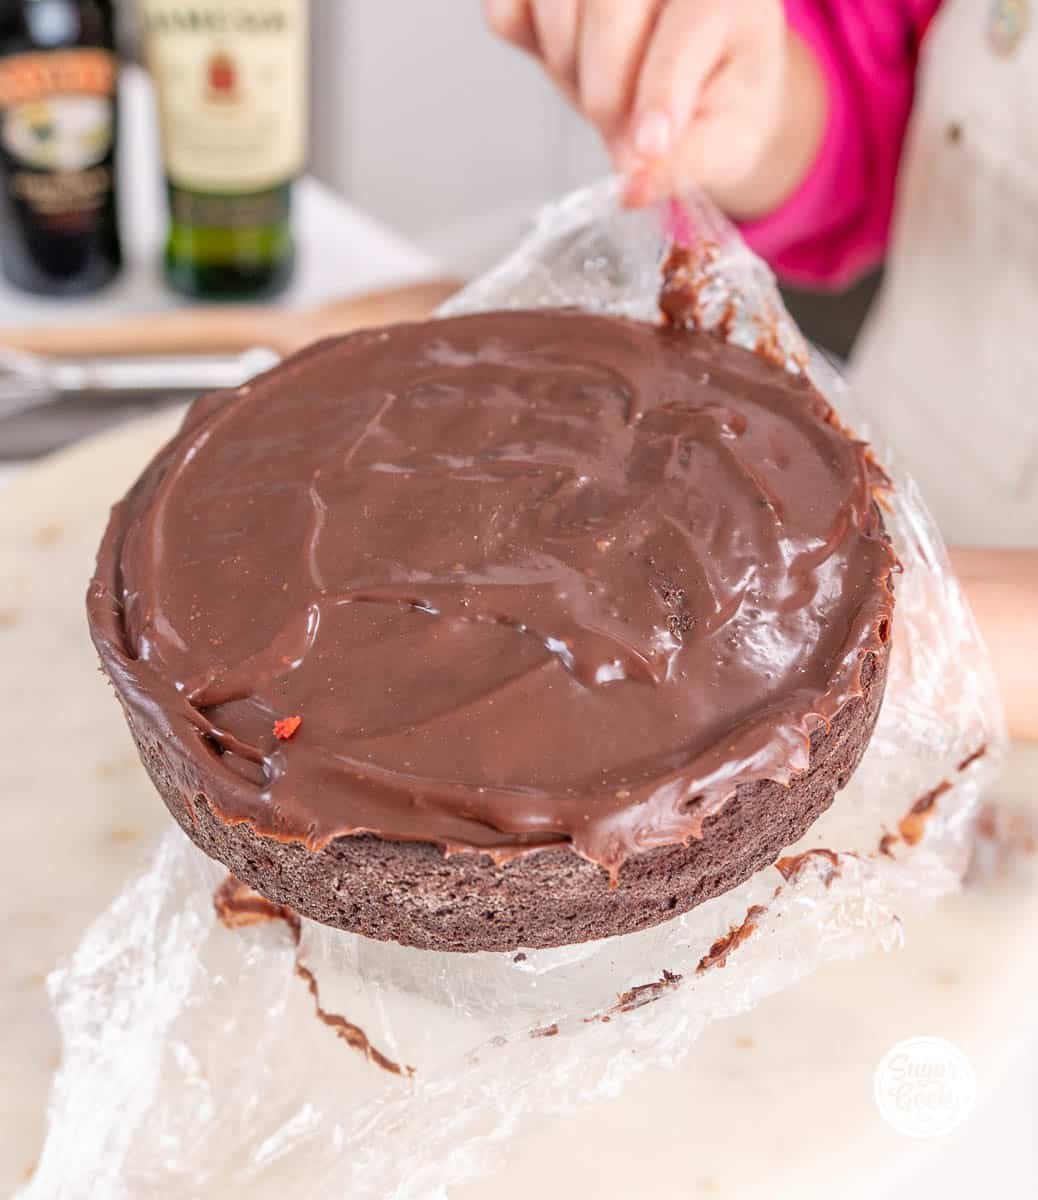 hands peeling plastic wrap off of a chilled chocolate cake